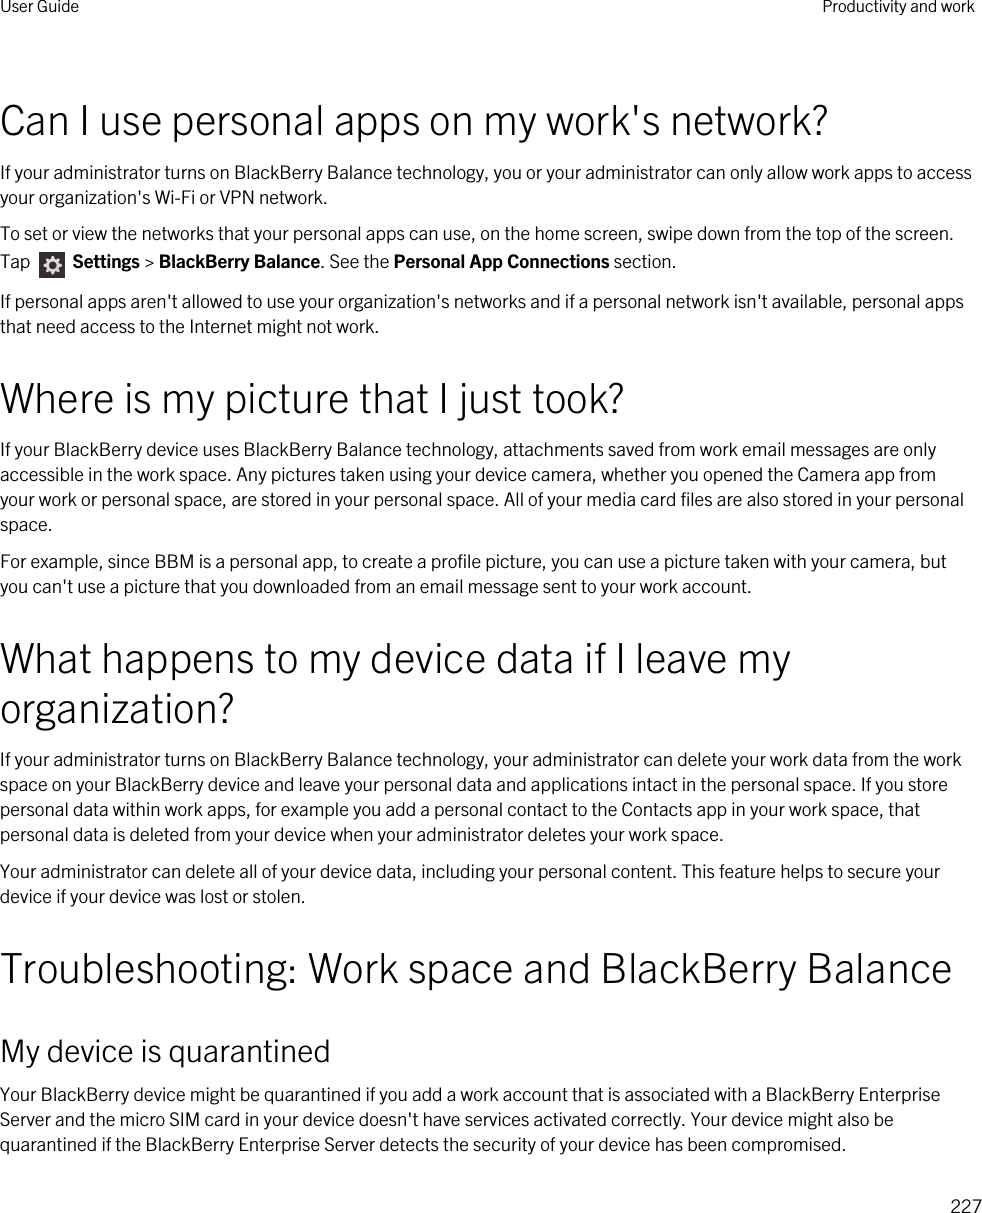 Can I use personal apps on my work&apos;s network?If your administrator turns on BlackBerry Balance technology, you or your administrator can only allow work apps to access your organization&apos;s Wi-Fi or VPN network.To set or view the networks that your personal apps can use, on the home screen, swipe down from the top of the screen. Tap   Settings &gt; BlackBerry Balance. See the Personal App Connections section.If personal apps aren&apos;t allowed to use your organization&apos;s networks and if a personal network isn&apos;t available, personal apps that need access to the Internet might not work.Where is my picture that I just took?If your BlackBerry device uses BlackBerry Balance technology, attachments saved from work email messages are only accessible in the work space. Any pictures taken using your device camera, whether you opened the Camera app from your work or personal space, are stored in your personal space. All of your media card files are also stored in your personal space.For example, since BBM is a personal app, to create a profile picture, you can use a picture taken with your camera, but you can&apos;t use a picture that you downloaded from an email message sent to your work account.What happens to my device data if I leave my organization?If your administrator turns on BlackBerry Balance technology, your administrator can delete your work data from the work space on your BlackBerry device and leave your personal data and applications intact in the personal space. If you store personal data within work apps, for example you add a personal contact to the Contacts app in your work space, that personal data is deleted from your device when your administrator deletes your work space.Your administrator can delete all of your device data, including your personal content. This feature helps to secure your device if your device was lost or stolen.Troubleshooting: Work space and BlackBerry BalanceMy device is quarantinedYour BlackBerry device might be quarantined if you add a work account that is associated with a BlackBerry Enterprise Server and the micro SIM card in your device doesn&apos;t have services activated correctly. Your device might also be quarantined if the BlackBerry Enterprise Server detects the security of your device has been compromised.User Guide Productivity and work227